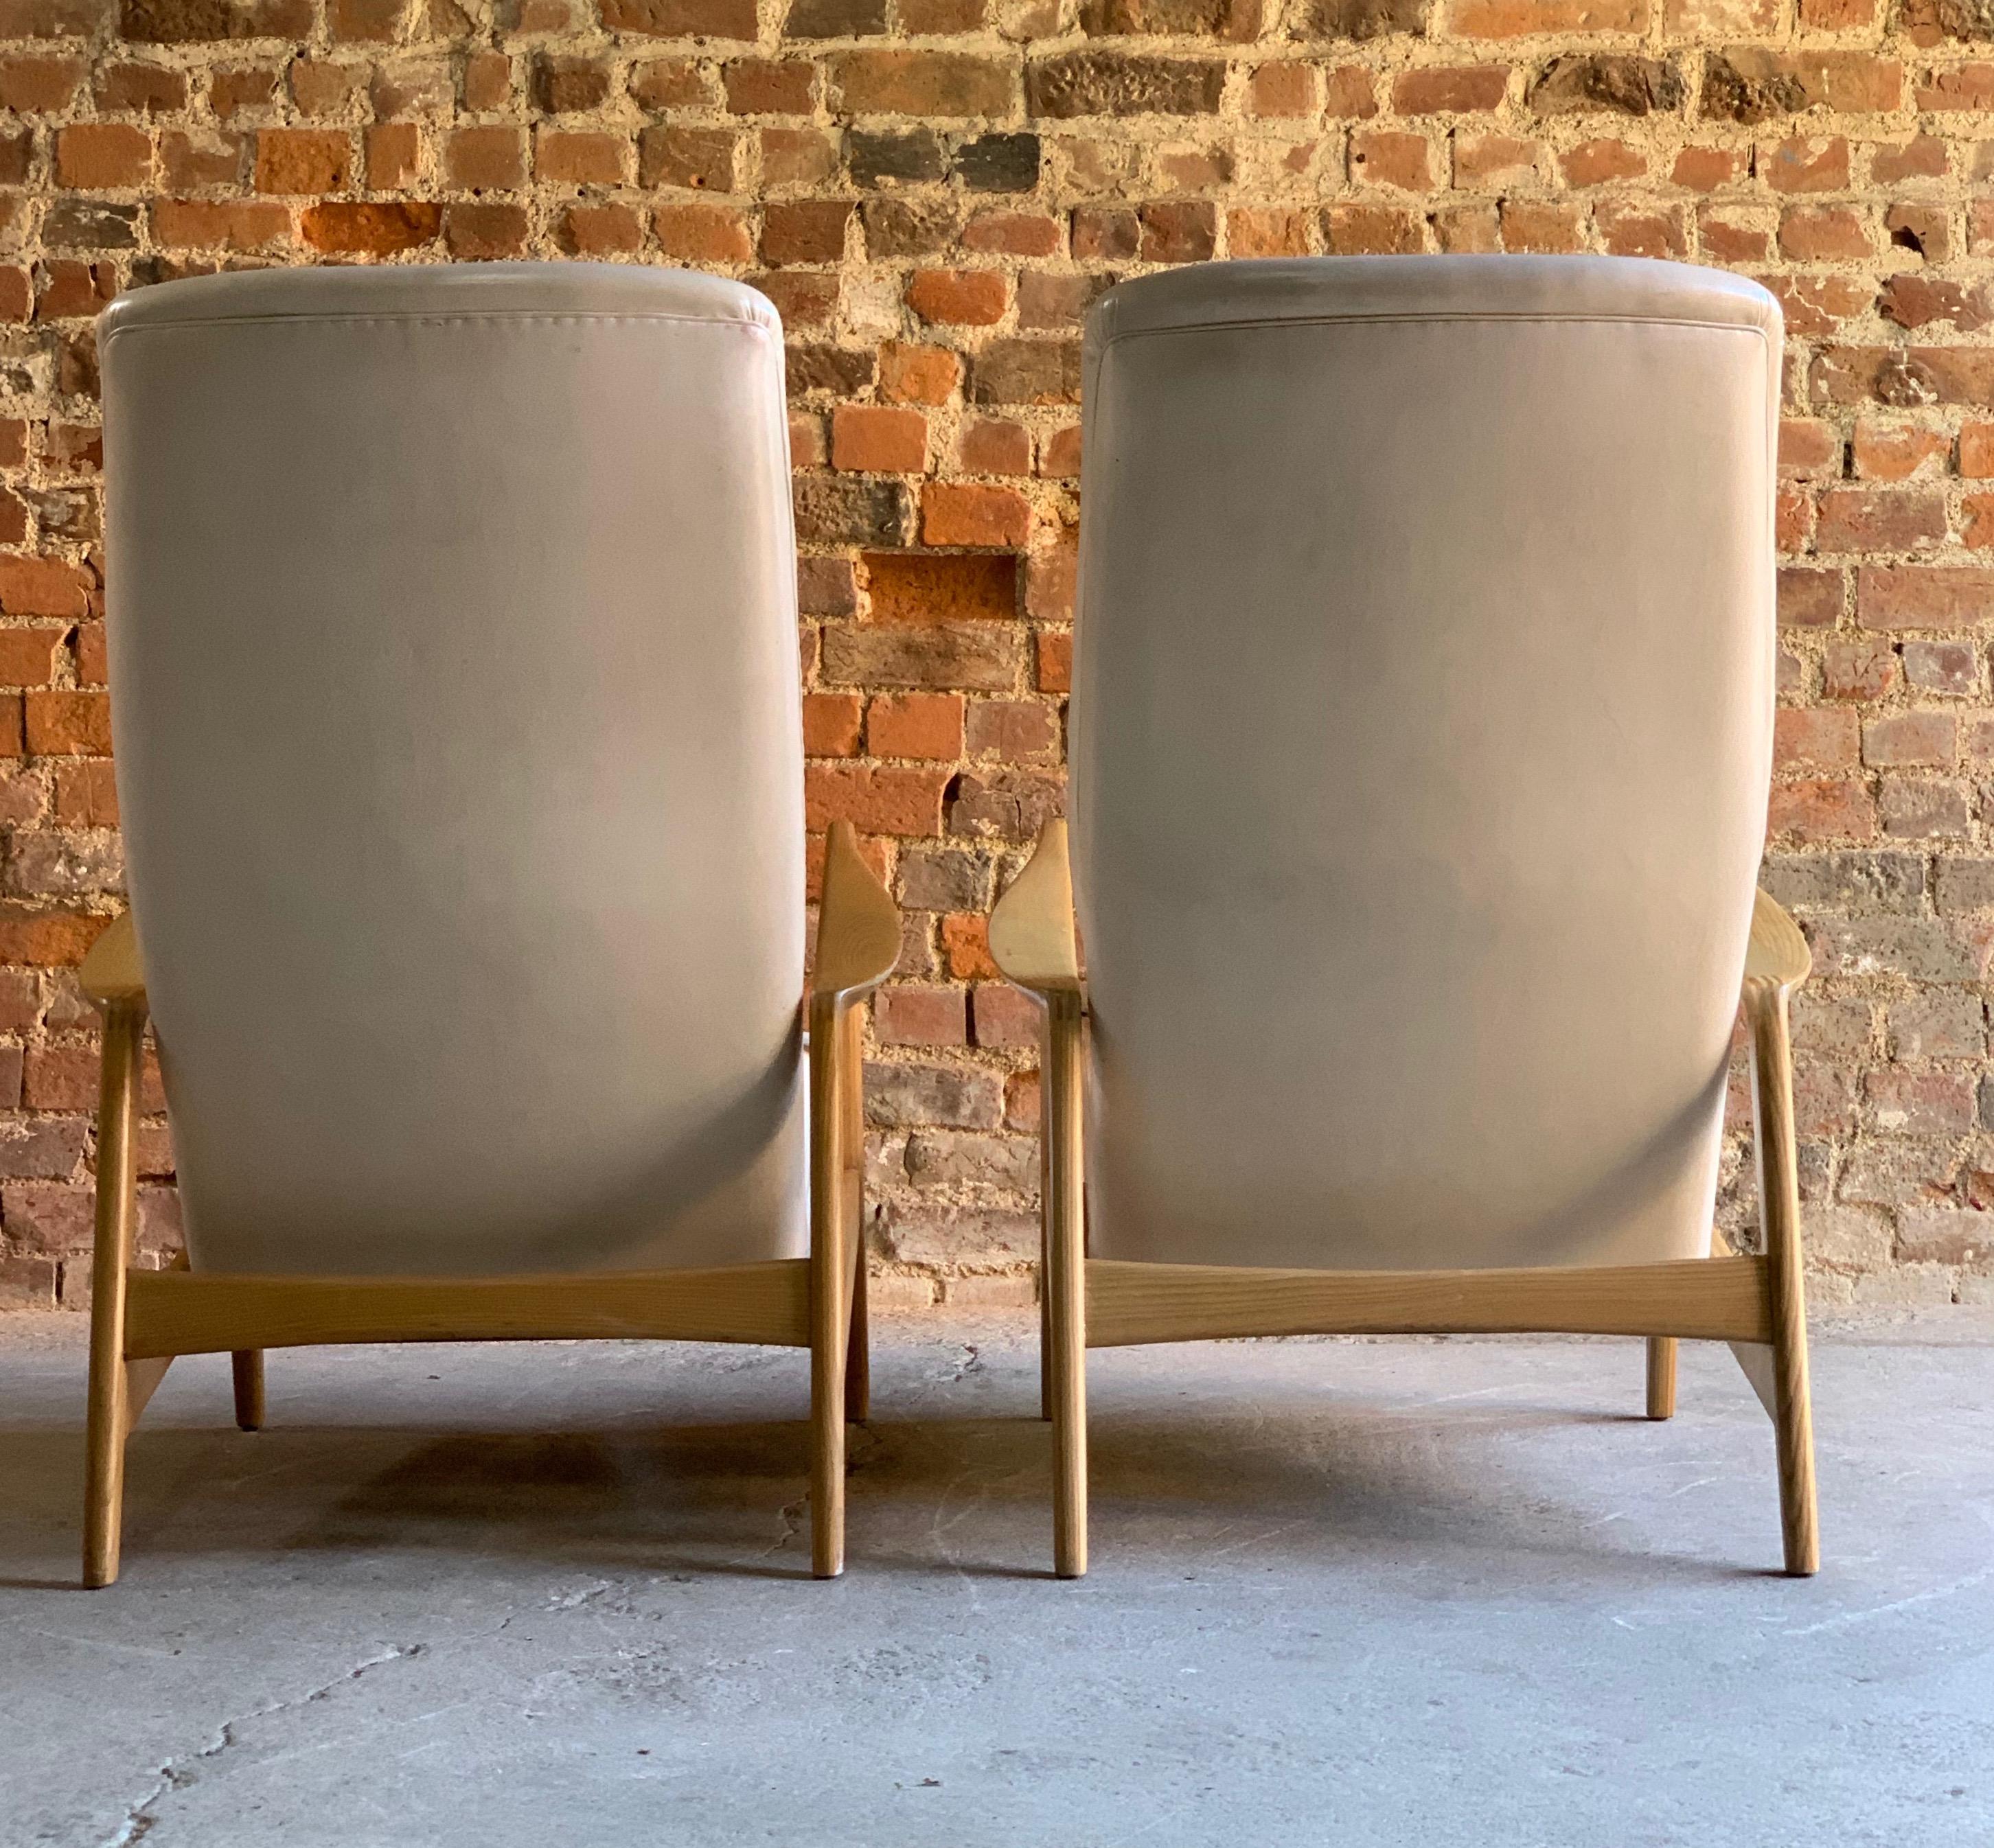 Gio Ponti pair ash lounge chairs by Cassina Italy circa 1958 for Hotel Parco dei Principe.

Gio Ponti pair of ash lounge chairs by Cassina Italy circa 1958, manufactured for the Hotel Parco dei Principe, Sorrento, Italy, The elegant sweeping lines